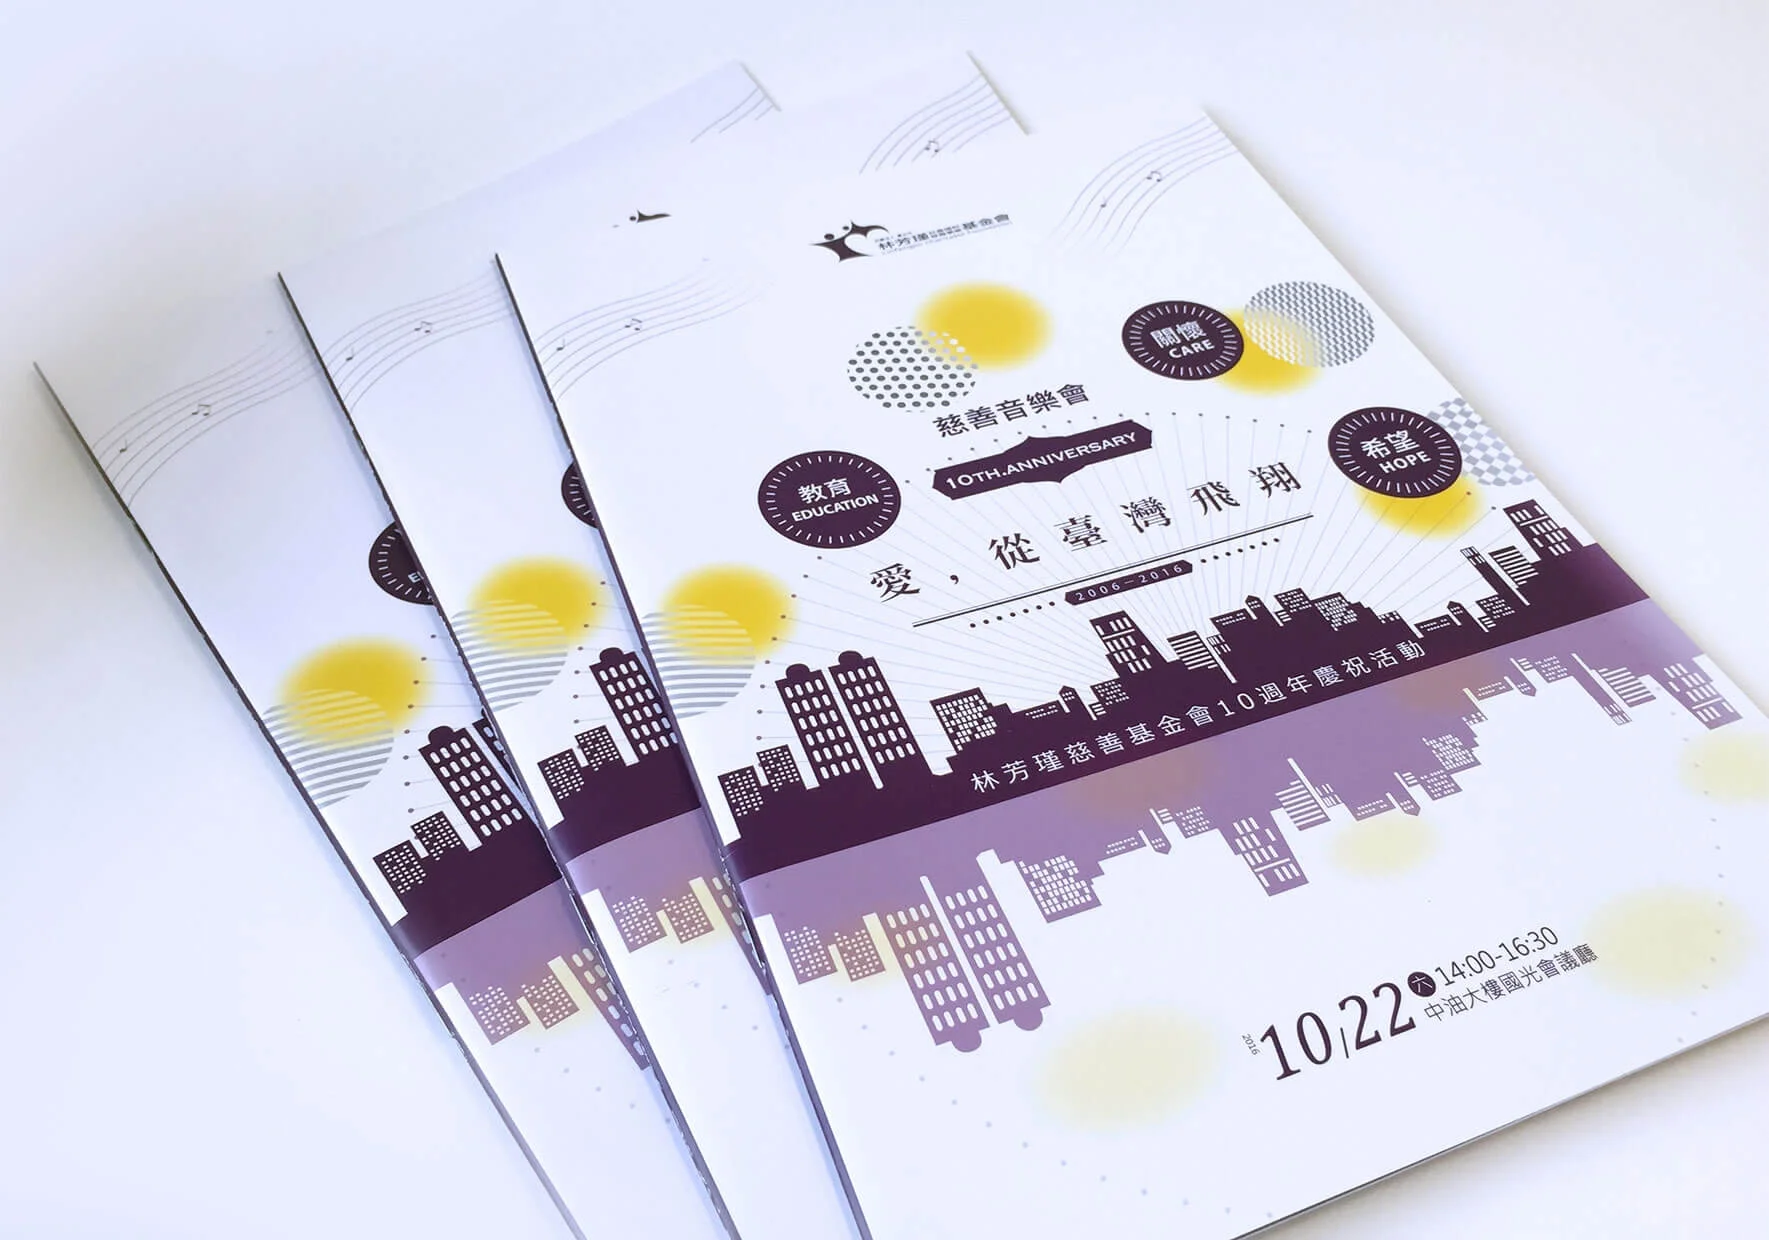 Visual design and printing of Lin Fangjin Foundation's anniversary event